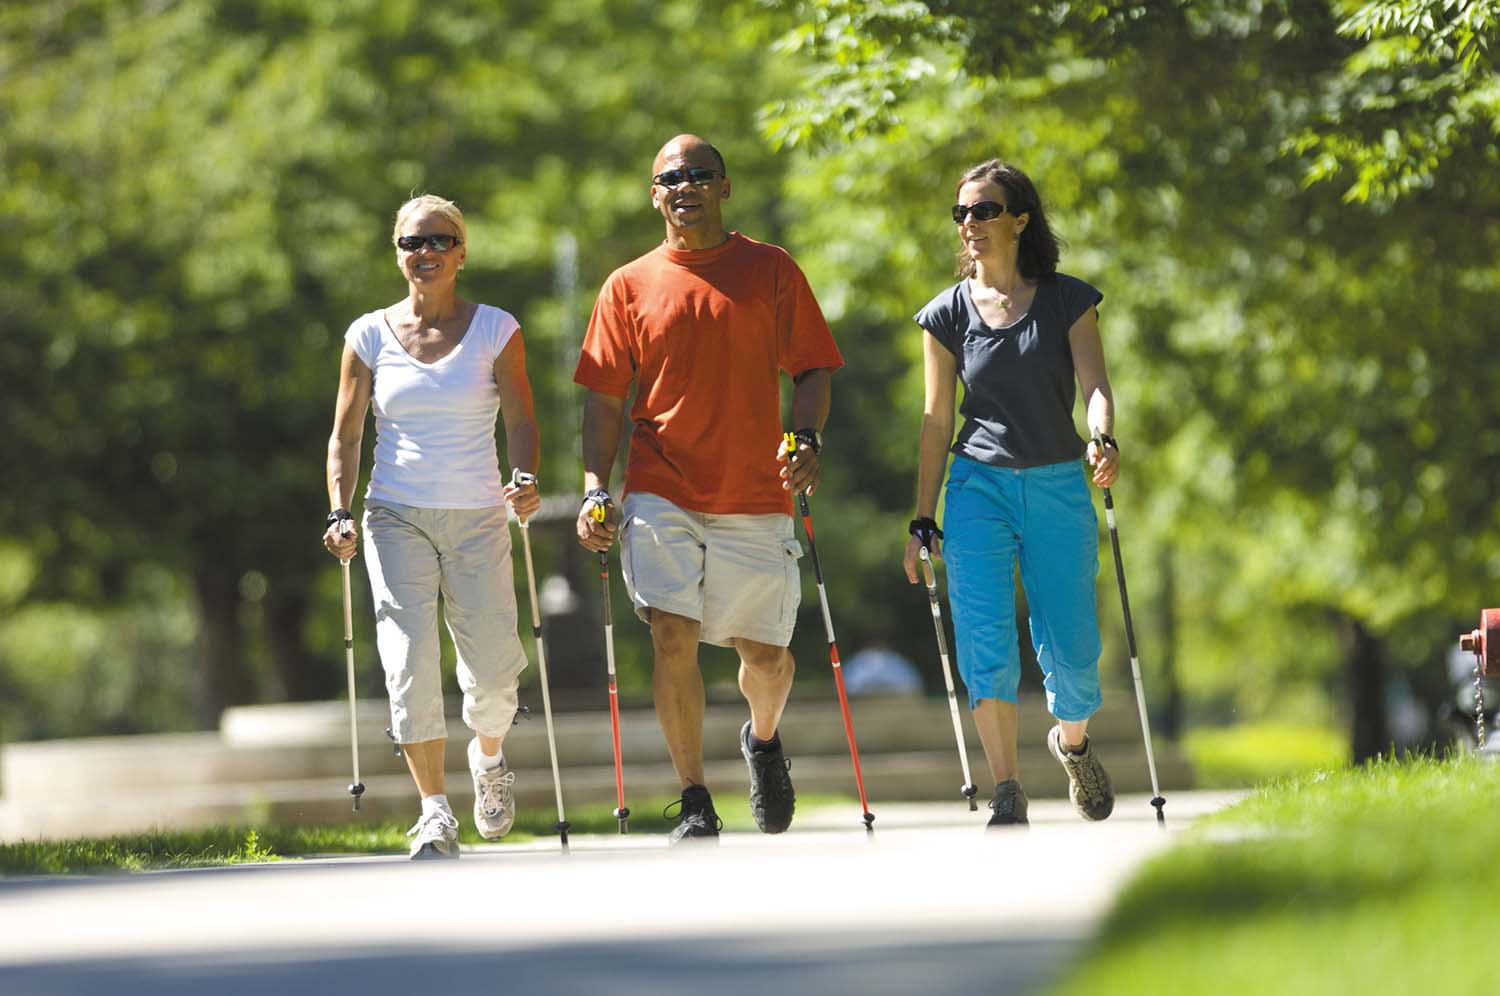 photo of a group of three people, one man and two women, doing nordic walking